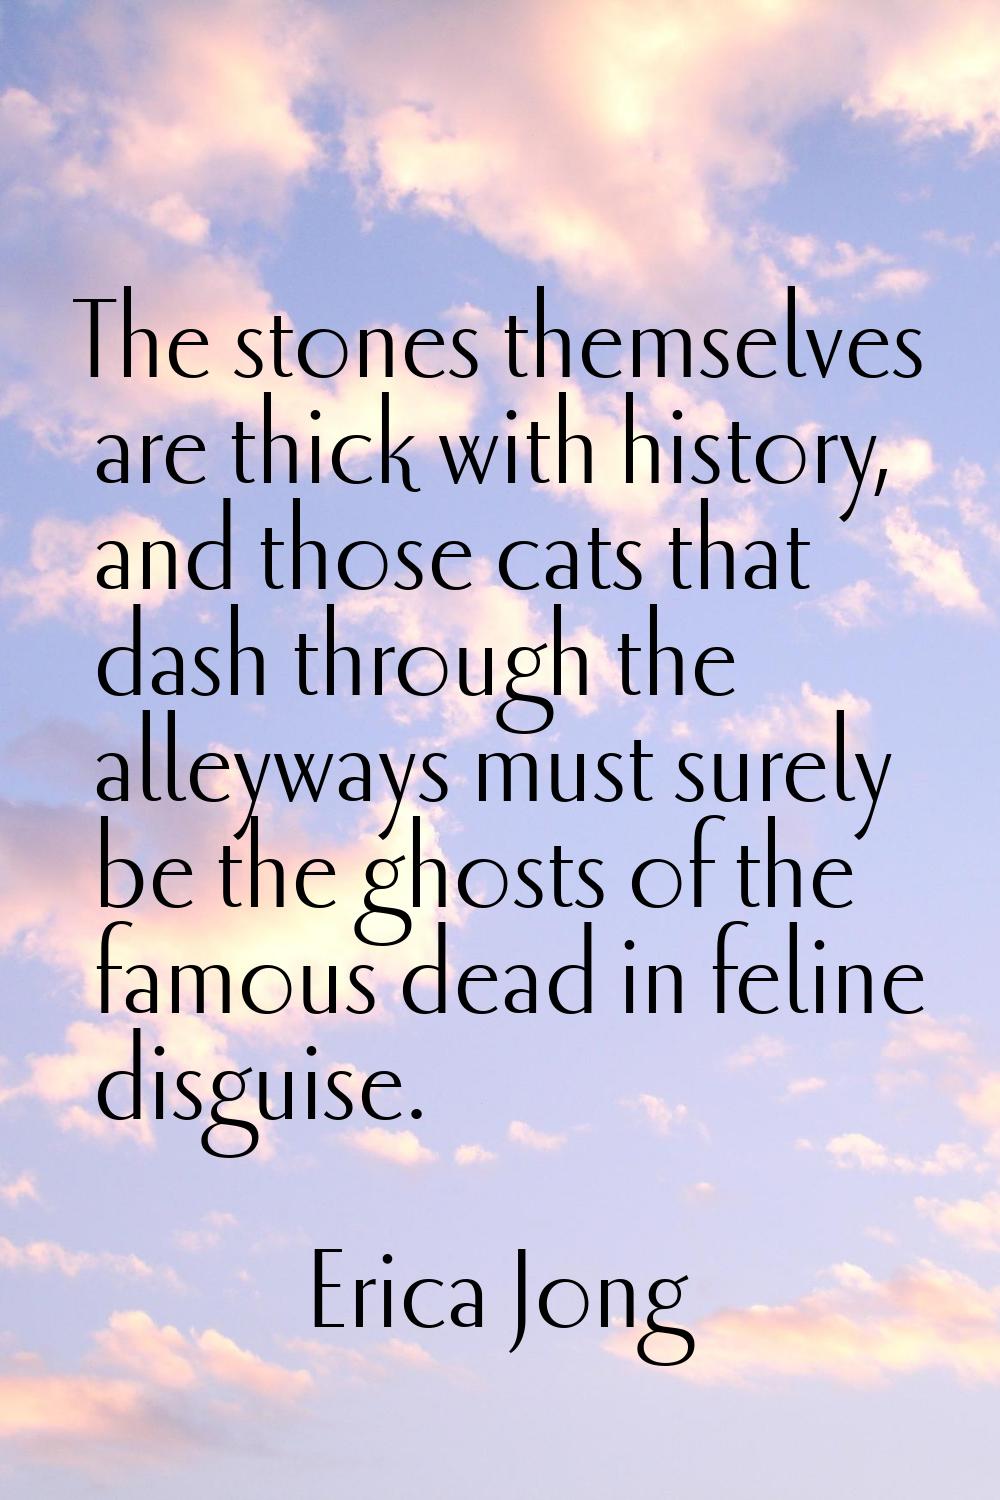 The stones themselves are thick with history, and those cats that dash through the alleyways must s